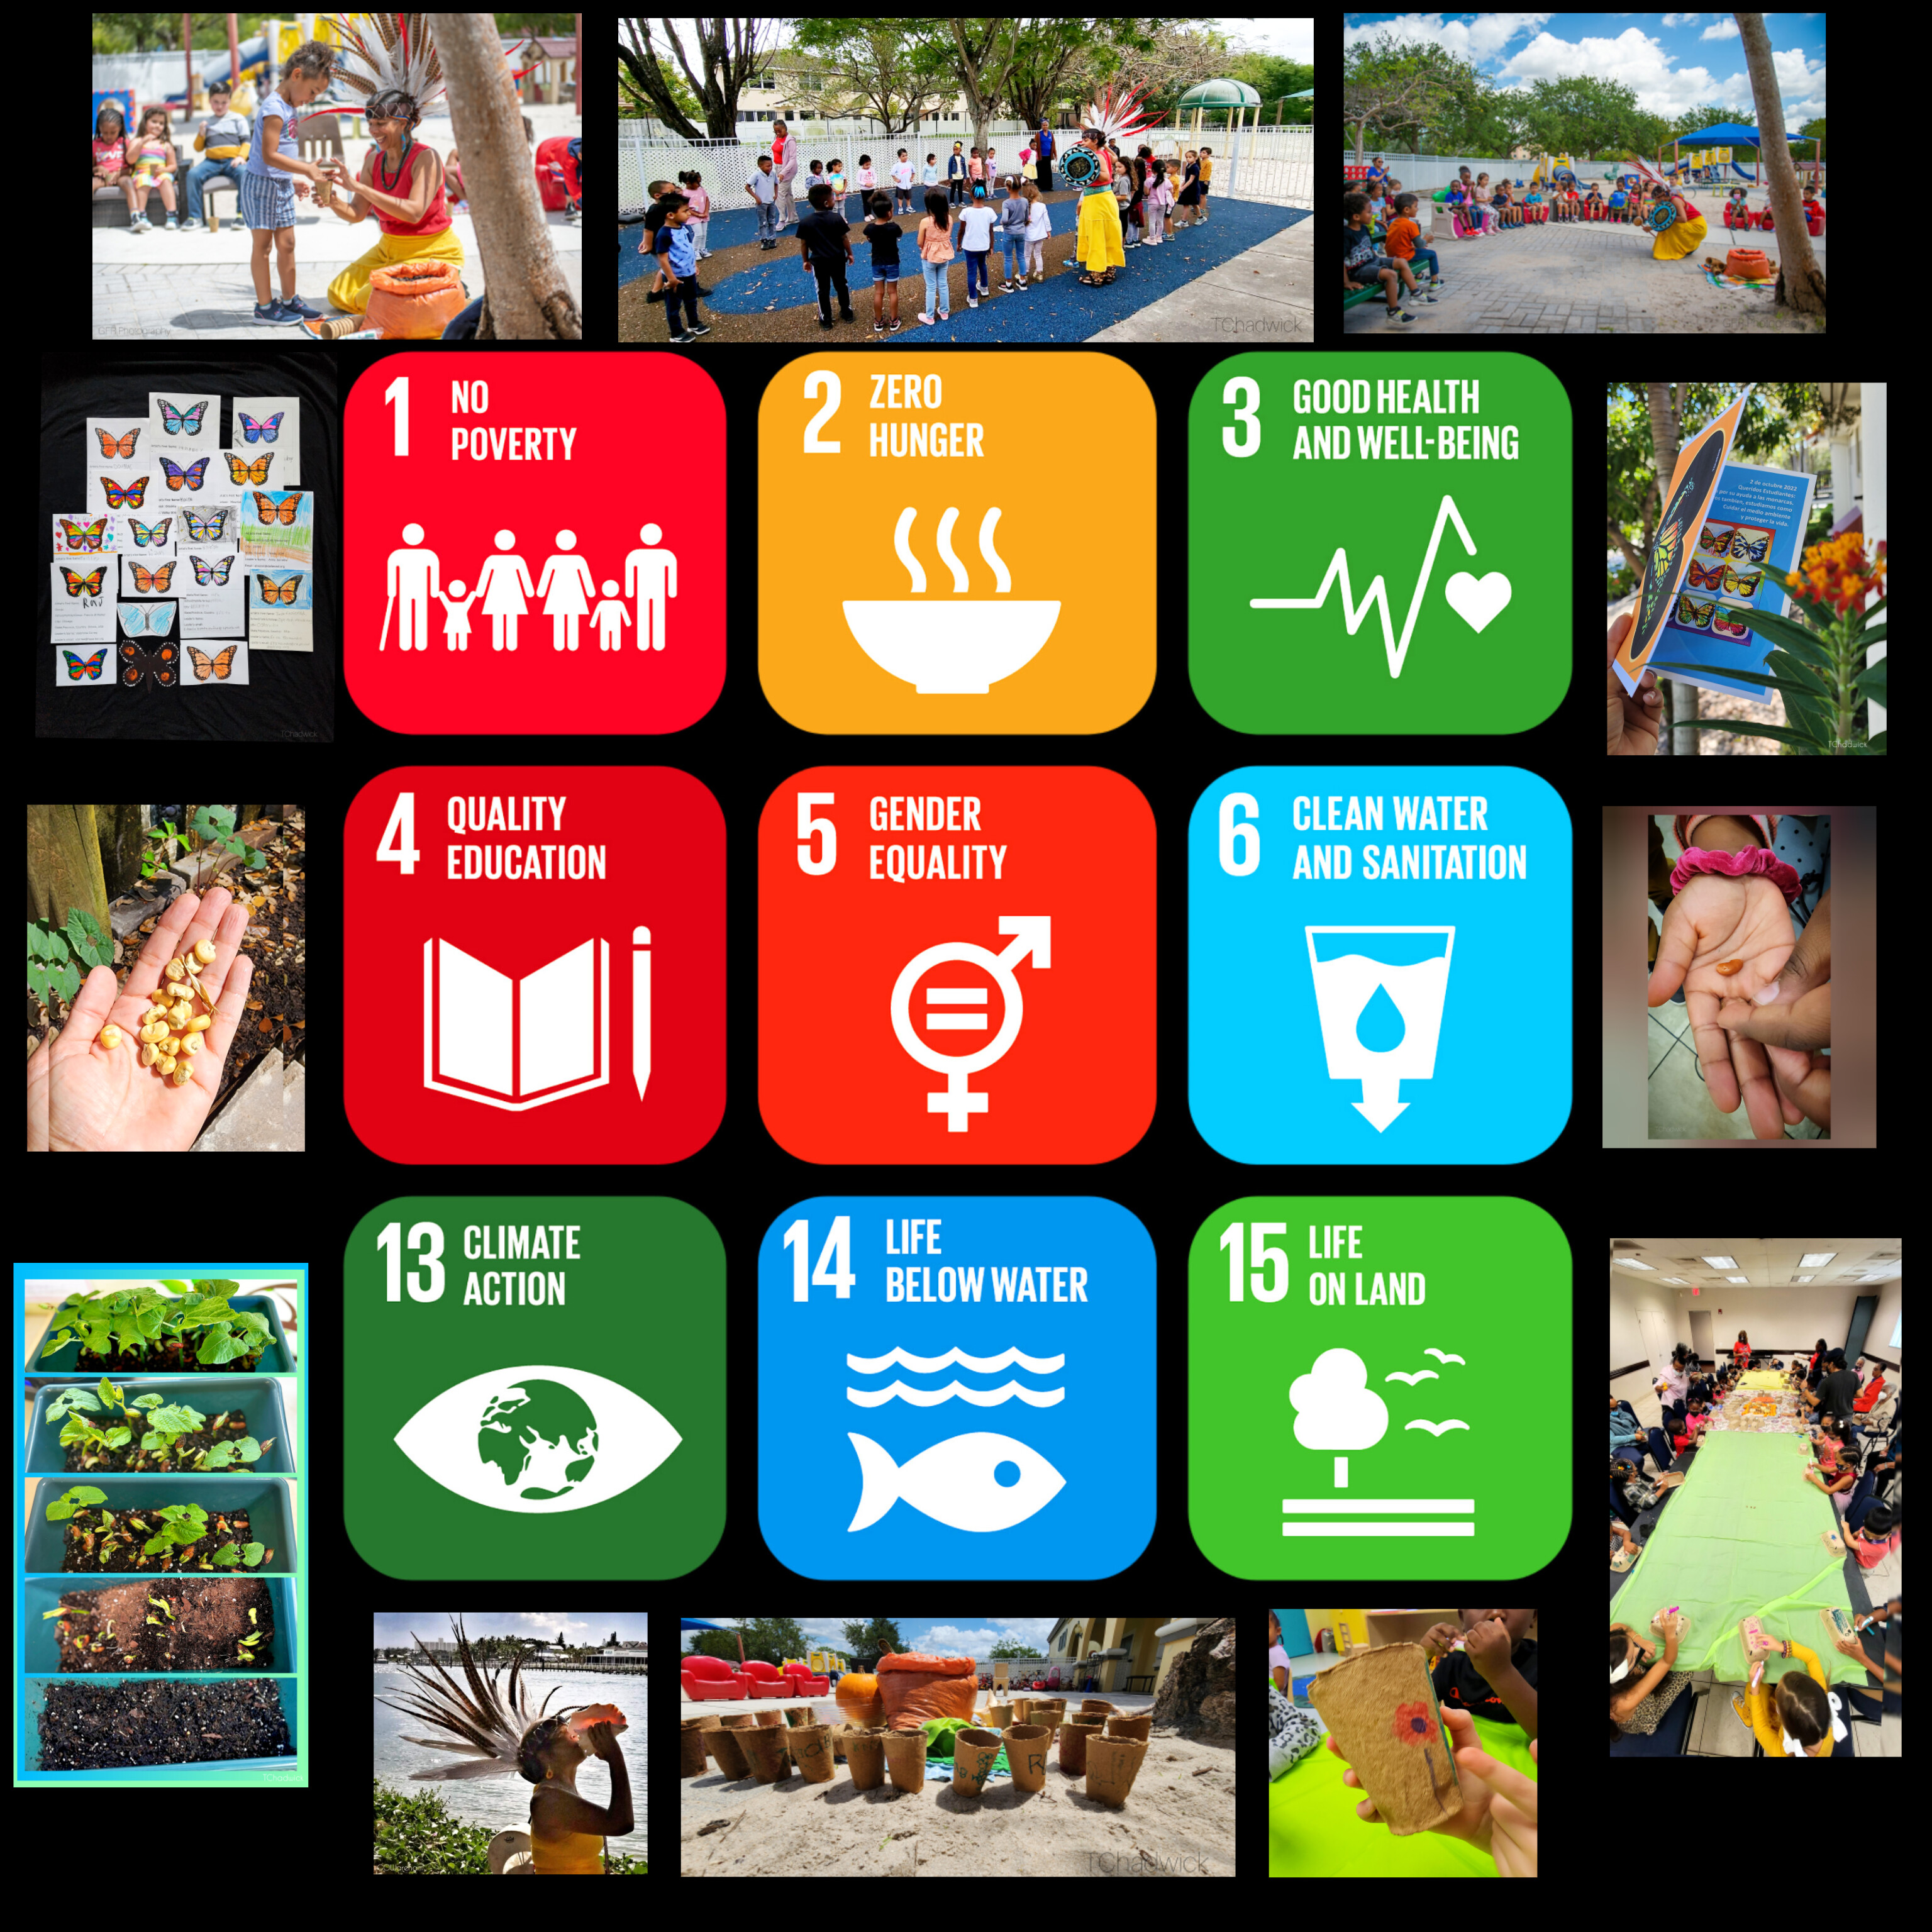 Graphic image for #SDGAction49893 shows nine Sustainable Development Goal icons surrounded by photo images of elders and youth engaged in various activities related to seed planting. 